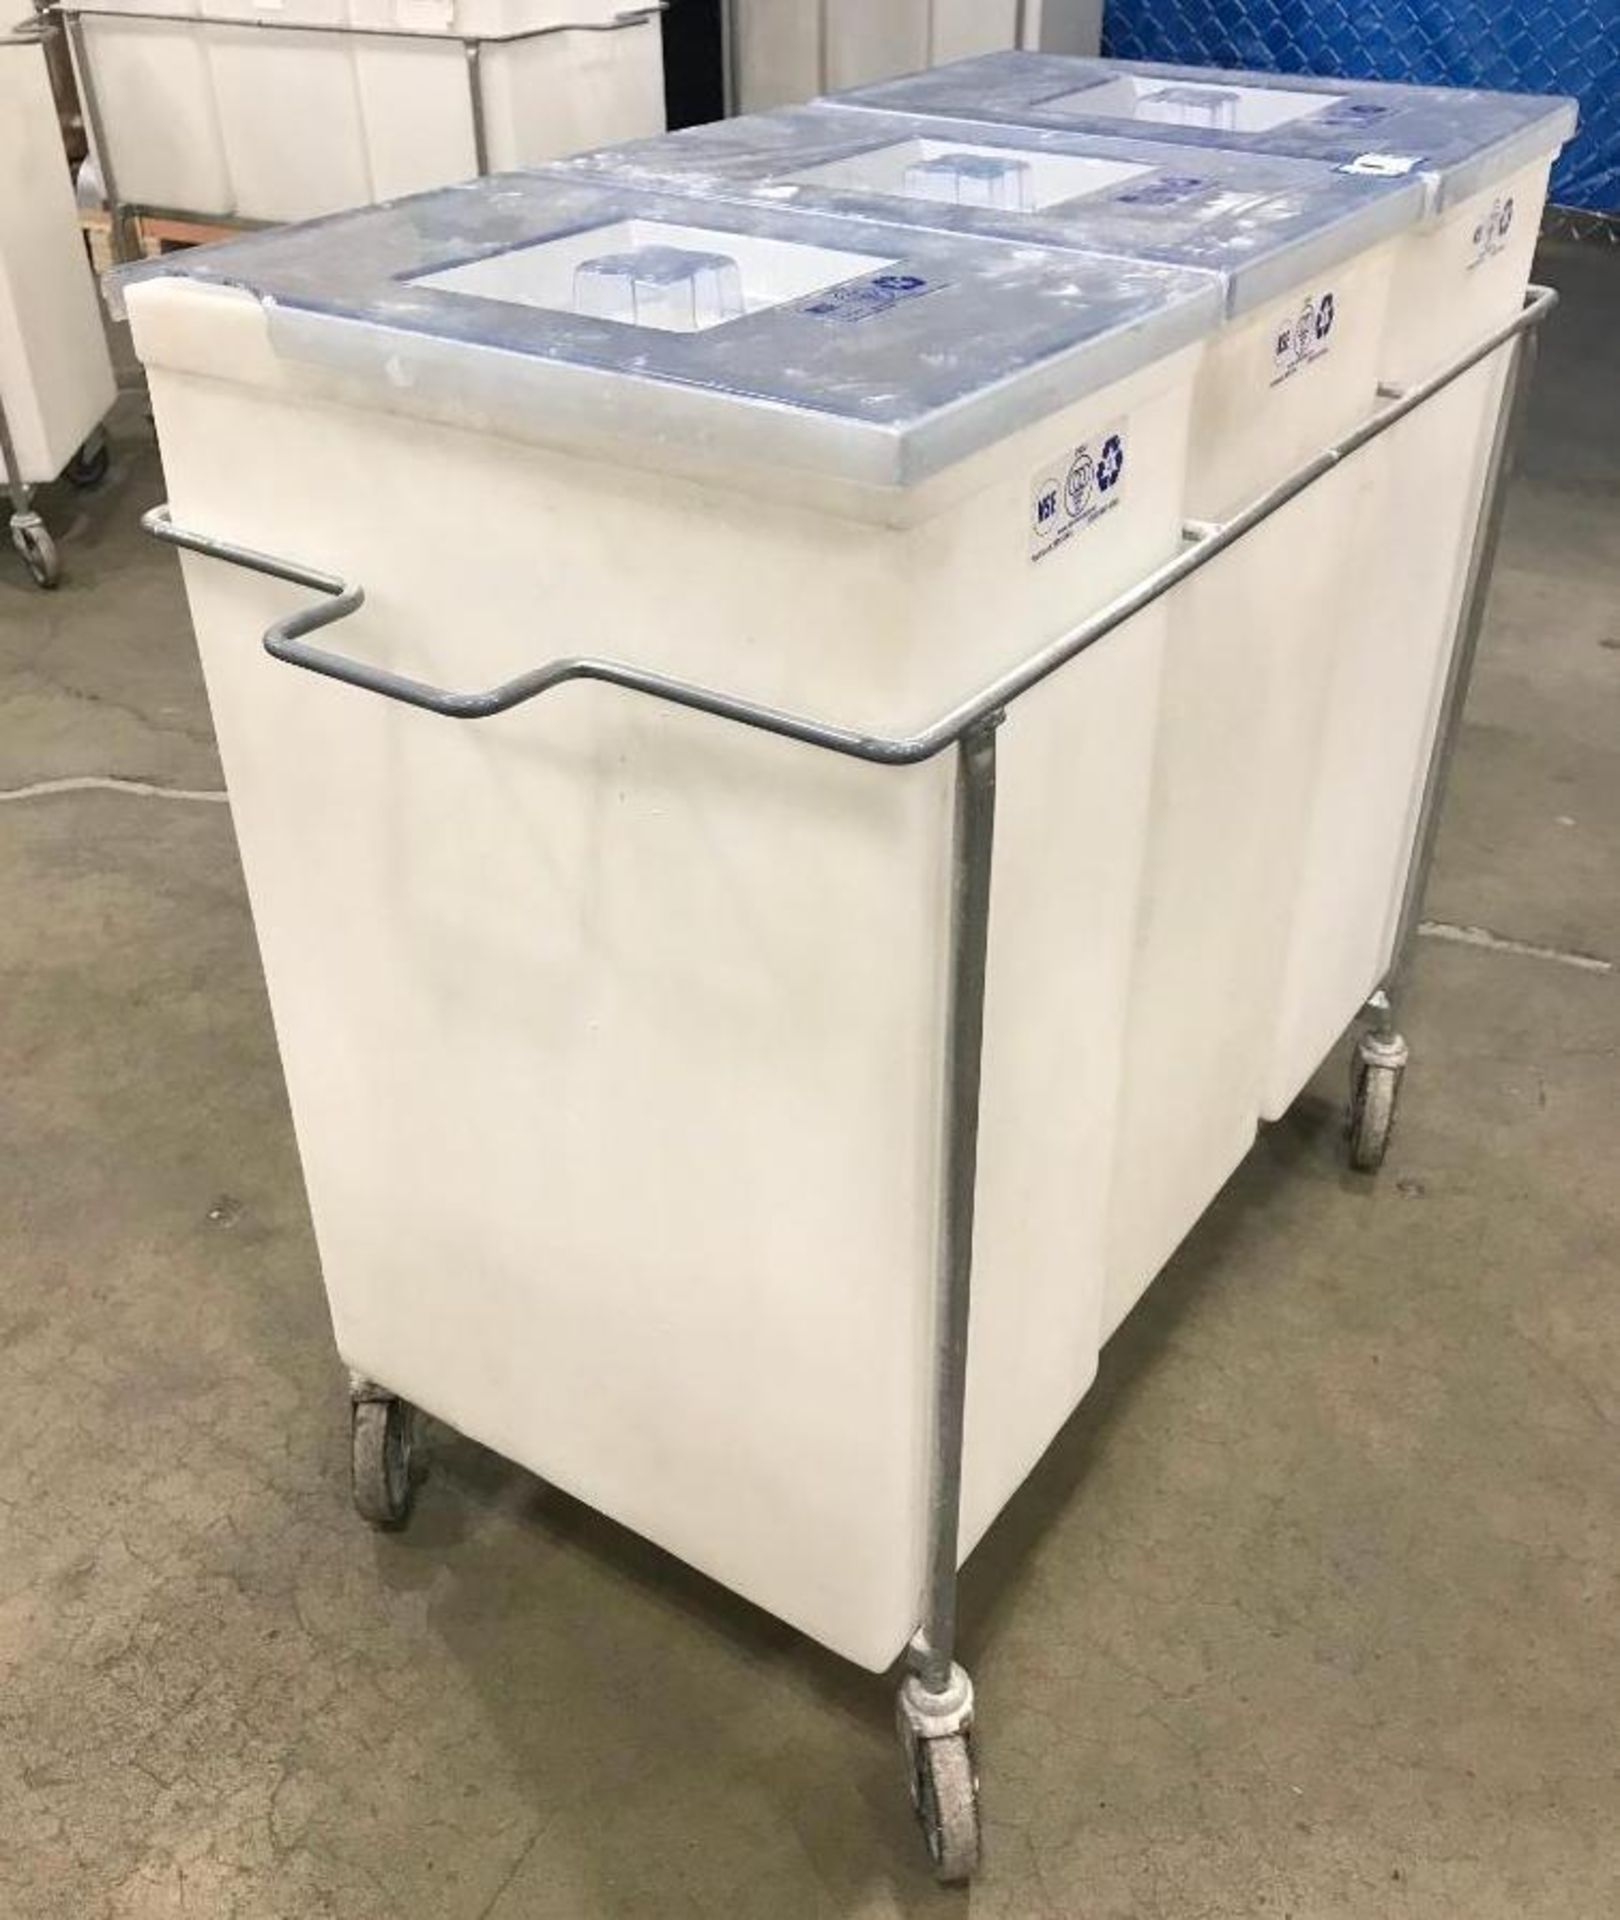 FARIBO INGREDIENT BIN CART - THREE 12 GALLON CONTAINERS WITH WIRE FRAME,CASTERS AND LIFT OFF COVERS